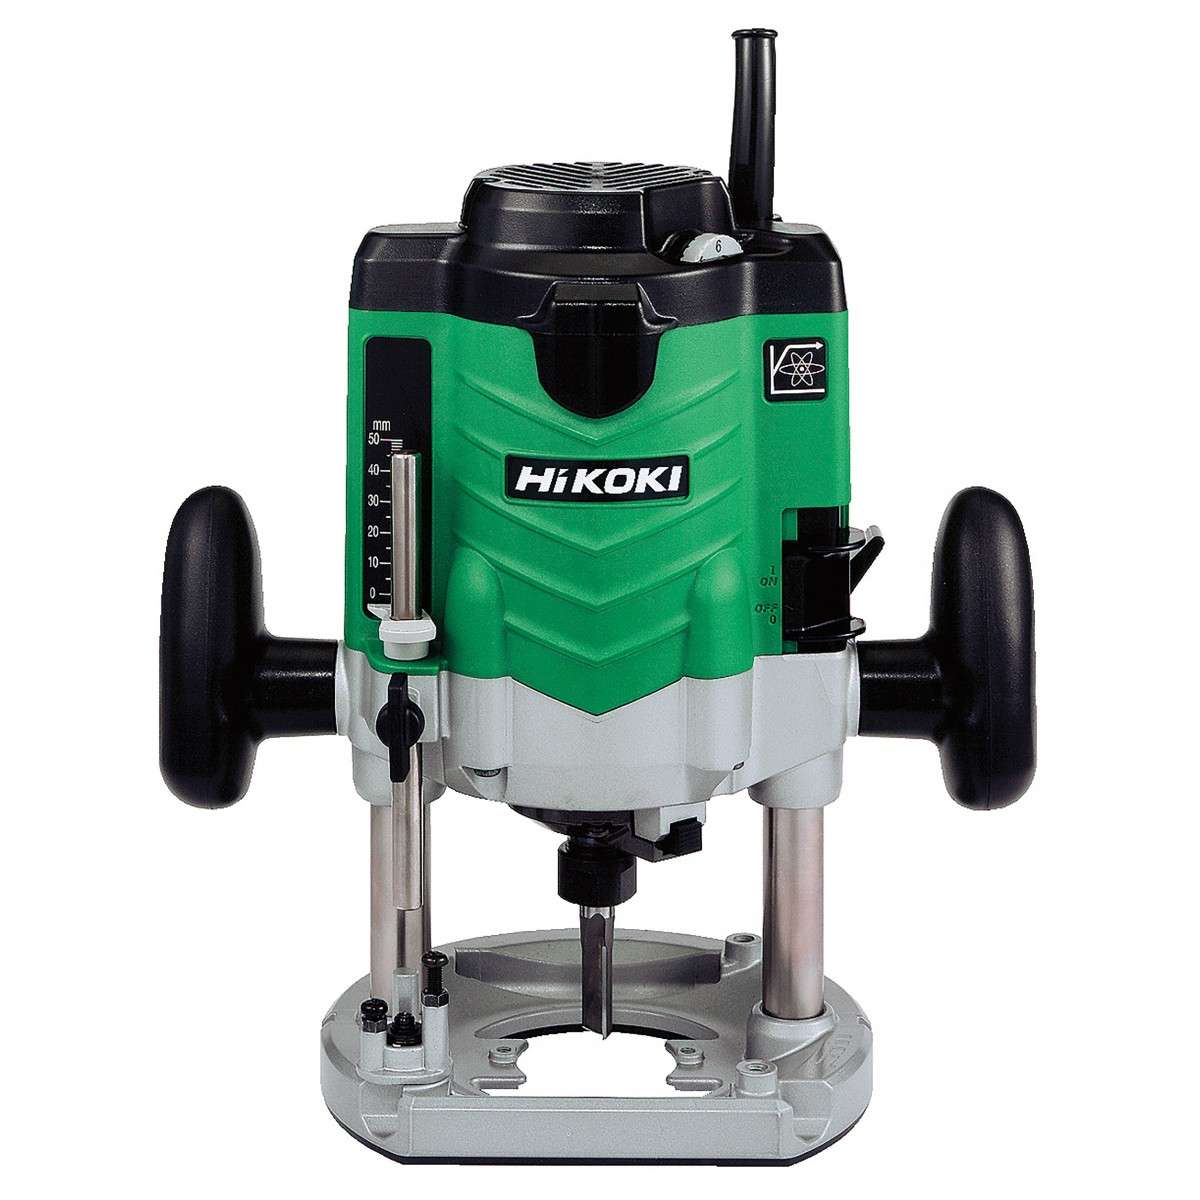 Hitachi M12VE(H1) – 240V 2000W 12.7mm (1/2”) Variable Speed Router